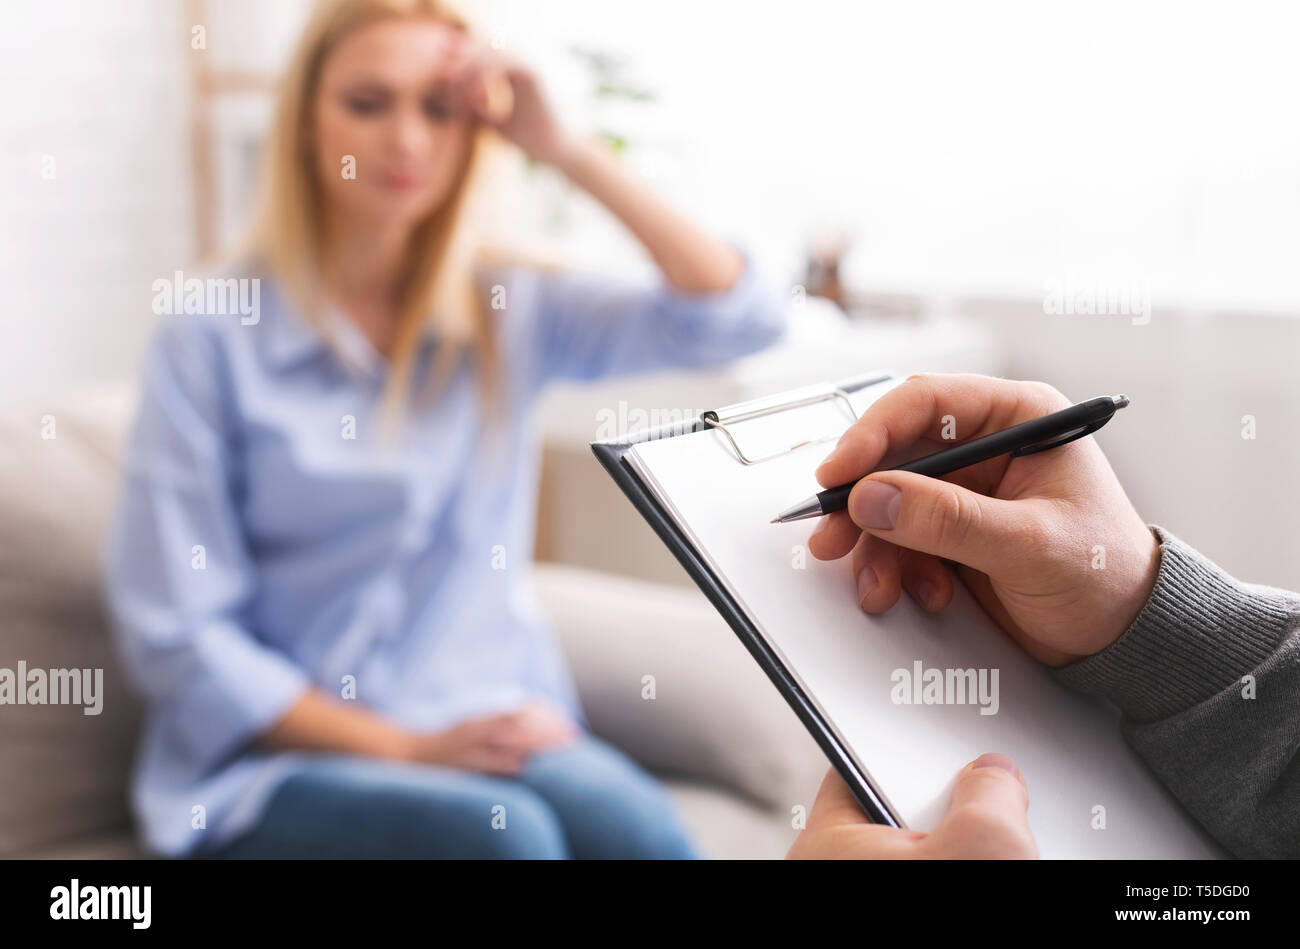 Depressed woman talking to psychotherapist, doctor taking notes Stock Photo